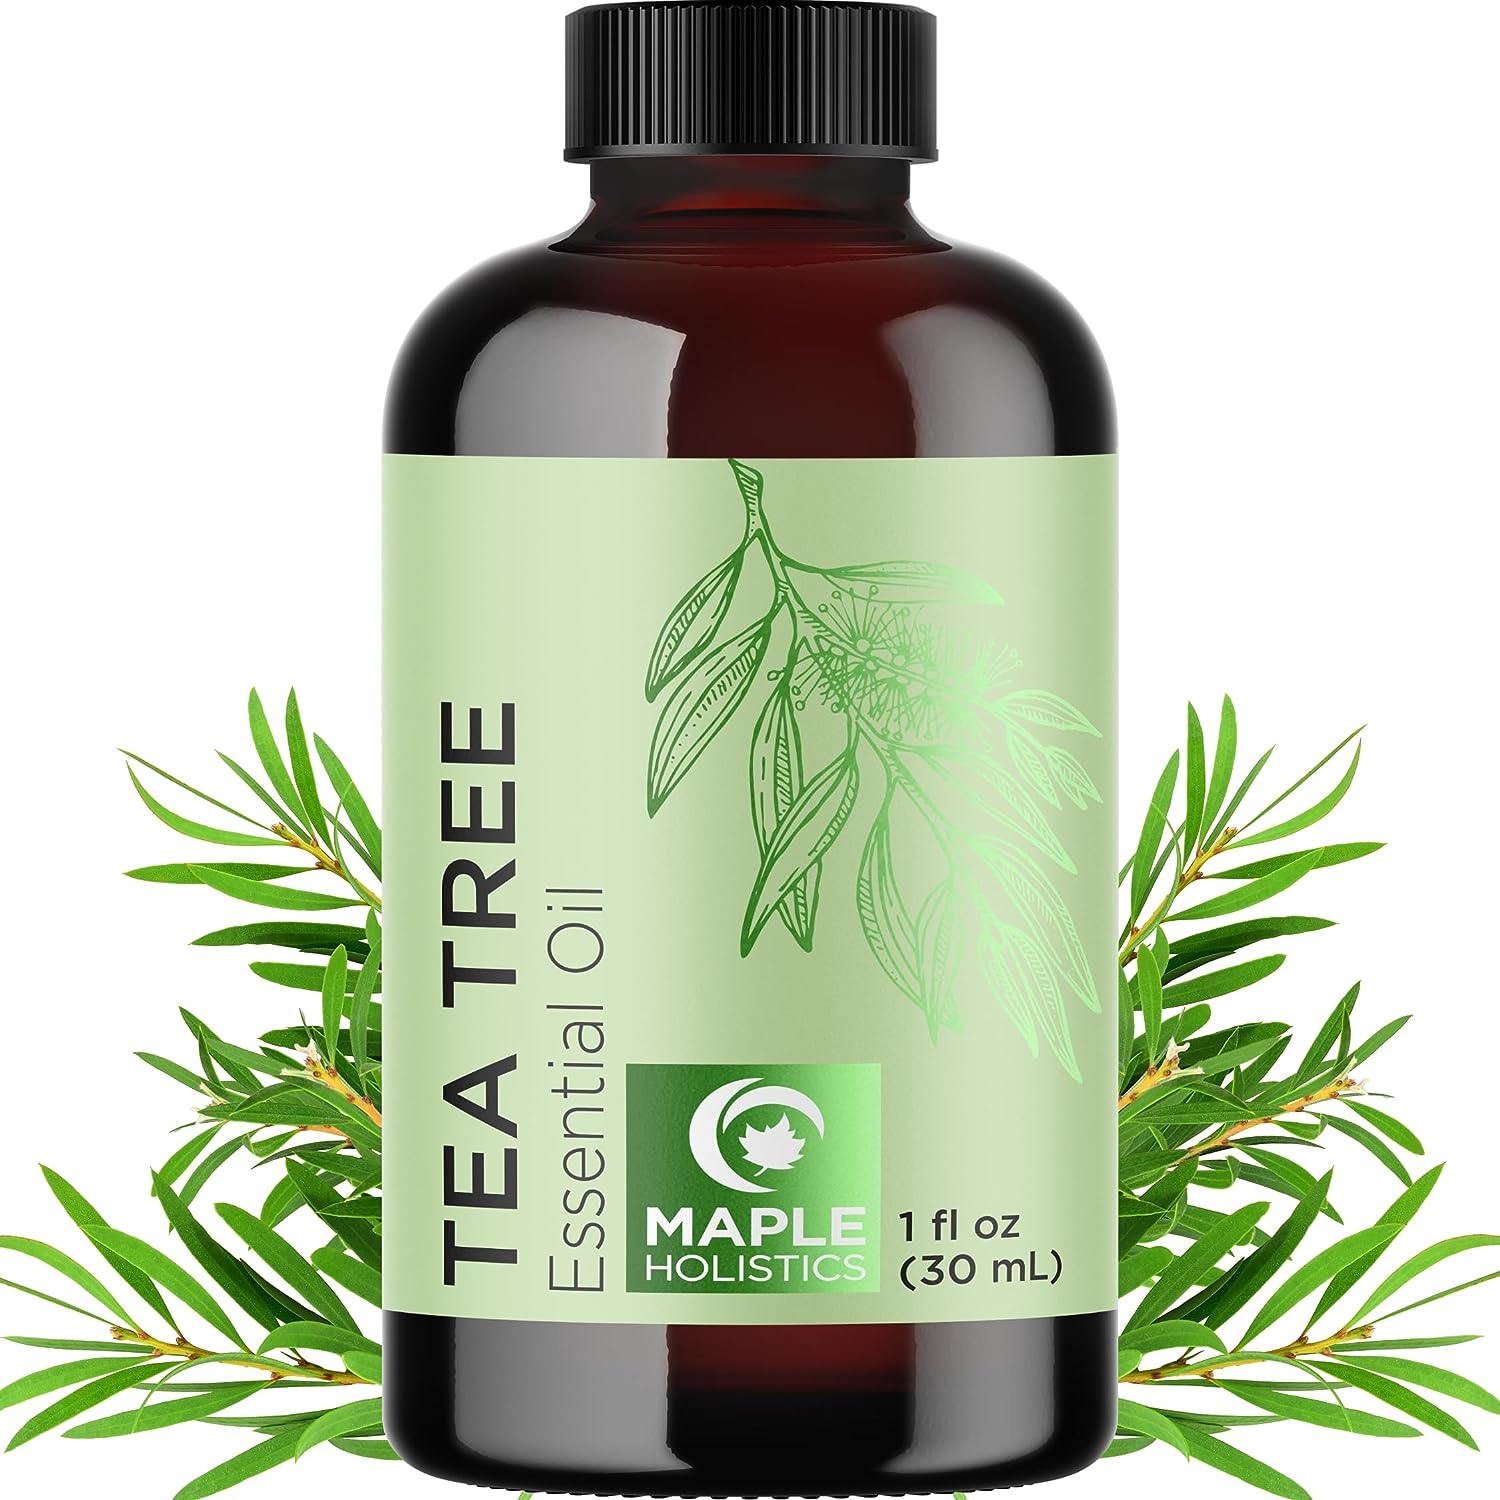 Undiluted Australian Tea Tree Essential Oil for Hair Skin and Nails - Pure Tea Tree Oil for Skin Cleanser Foot Soak and Dry Scalp Treatment, 1 fl oz - image 1 of 6